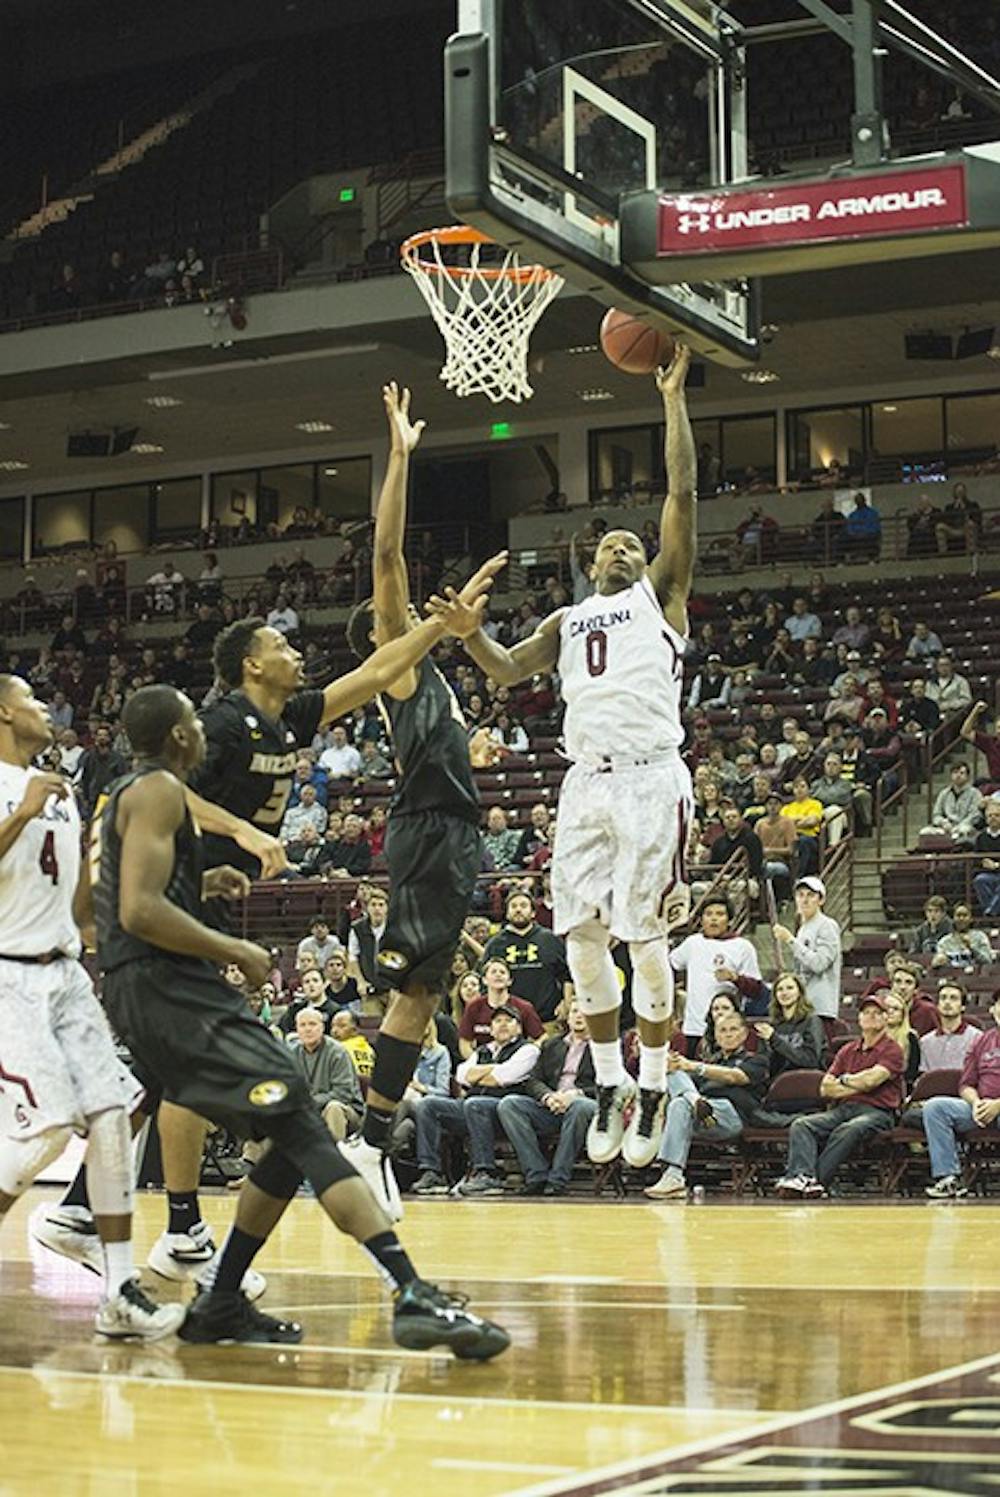 <p>South Carolina will face Missouri in the first round of the 2015 SEC tournament on Wednesday, March 11. South Carolina defeated Missouri 65-60 on February 10 behind a 14-point performance from sophomore guard Sindarius Thornwell. </p>